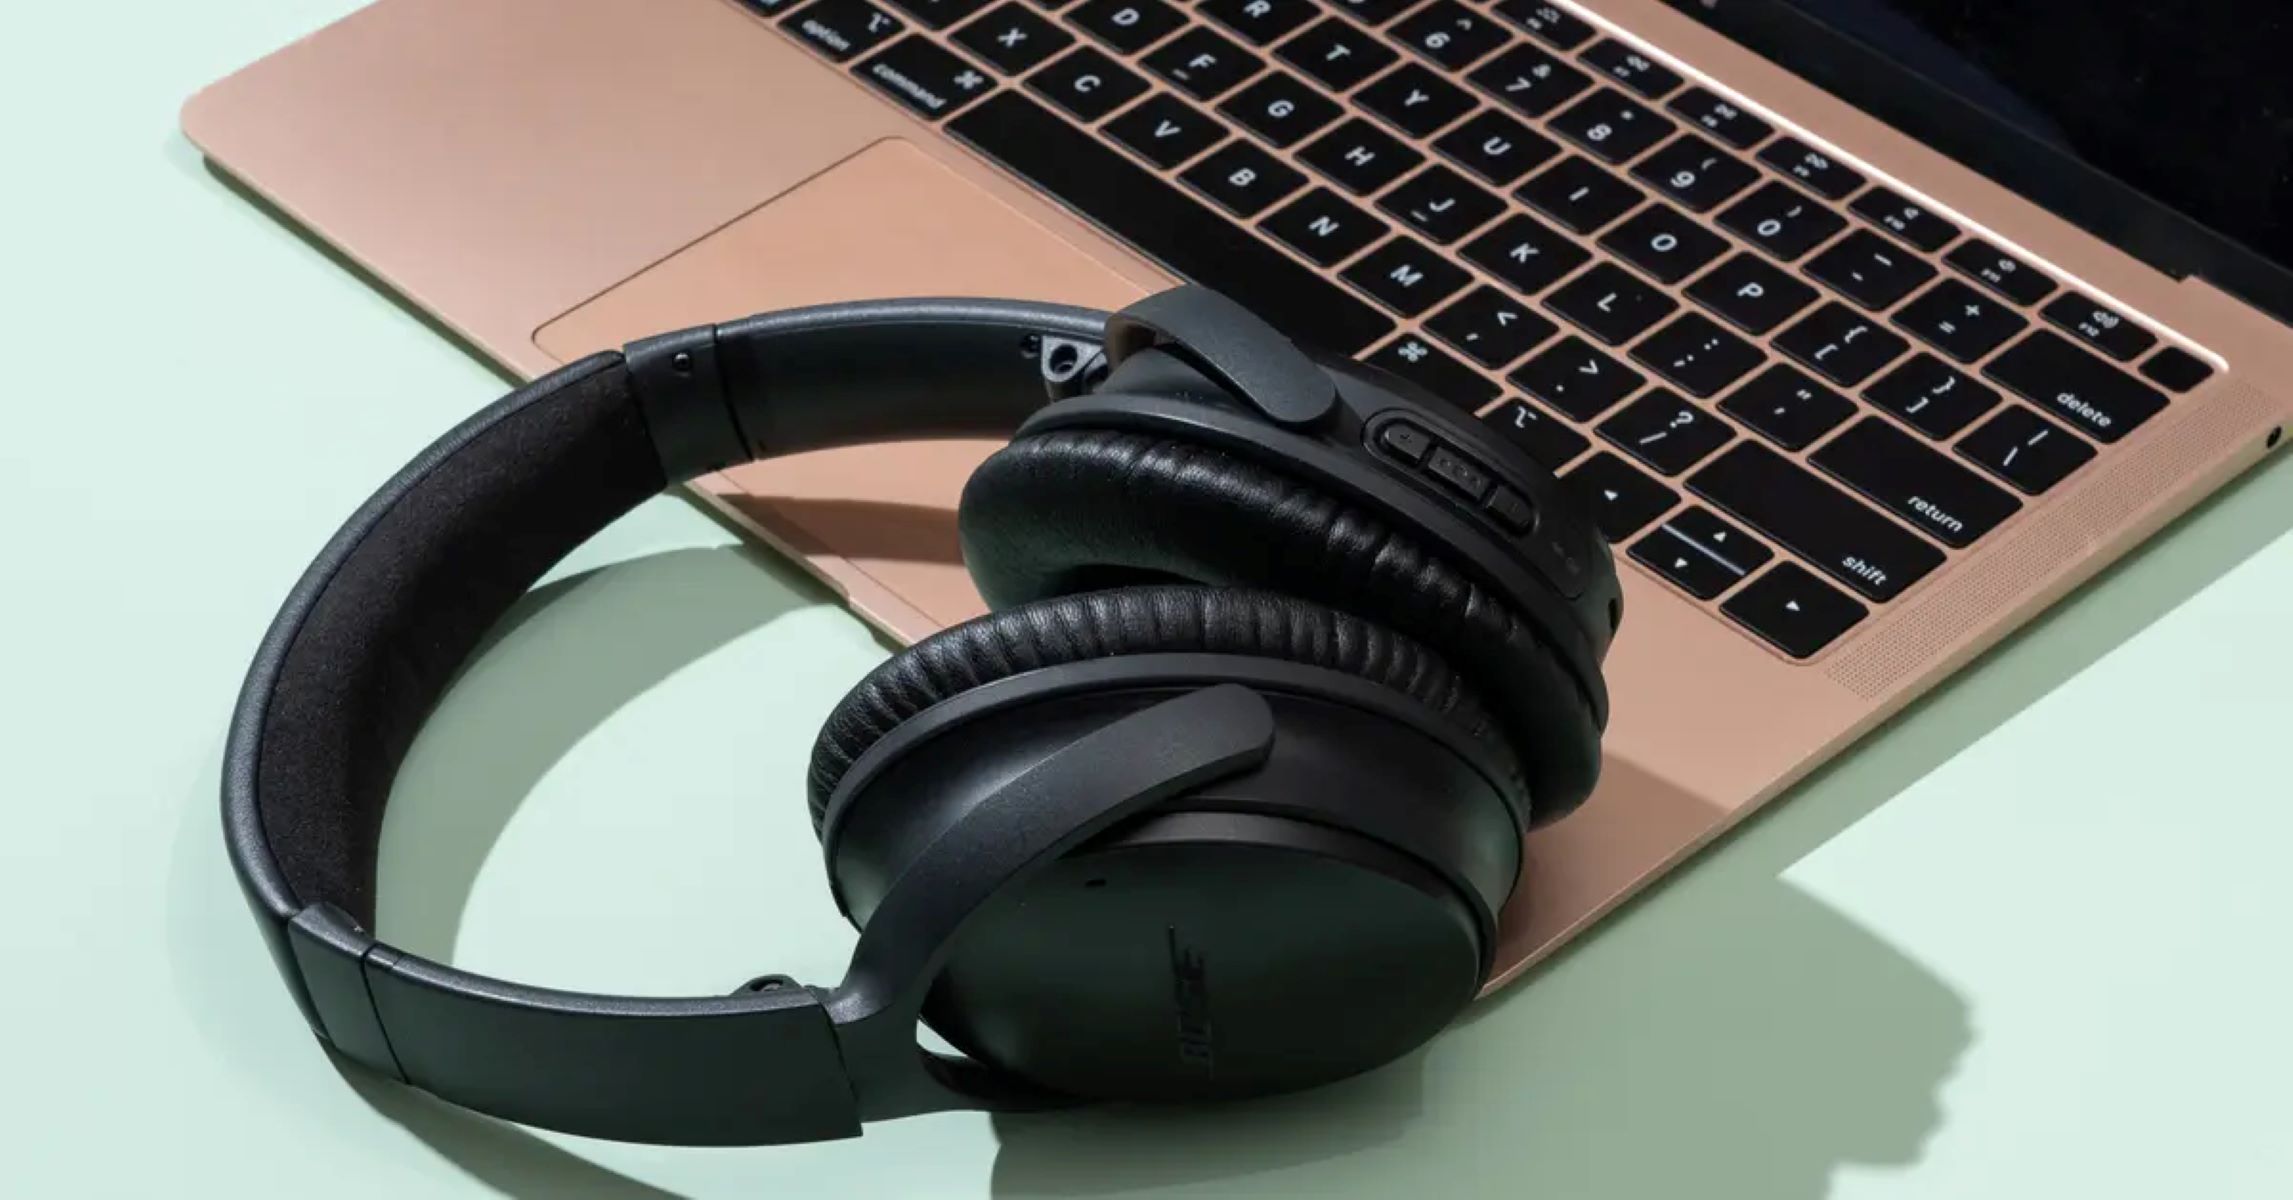 How To Connect Wireless Headphones To Laptop